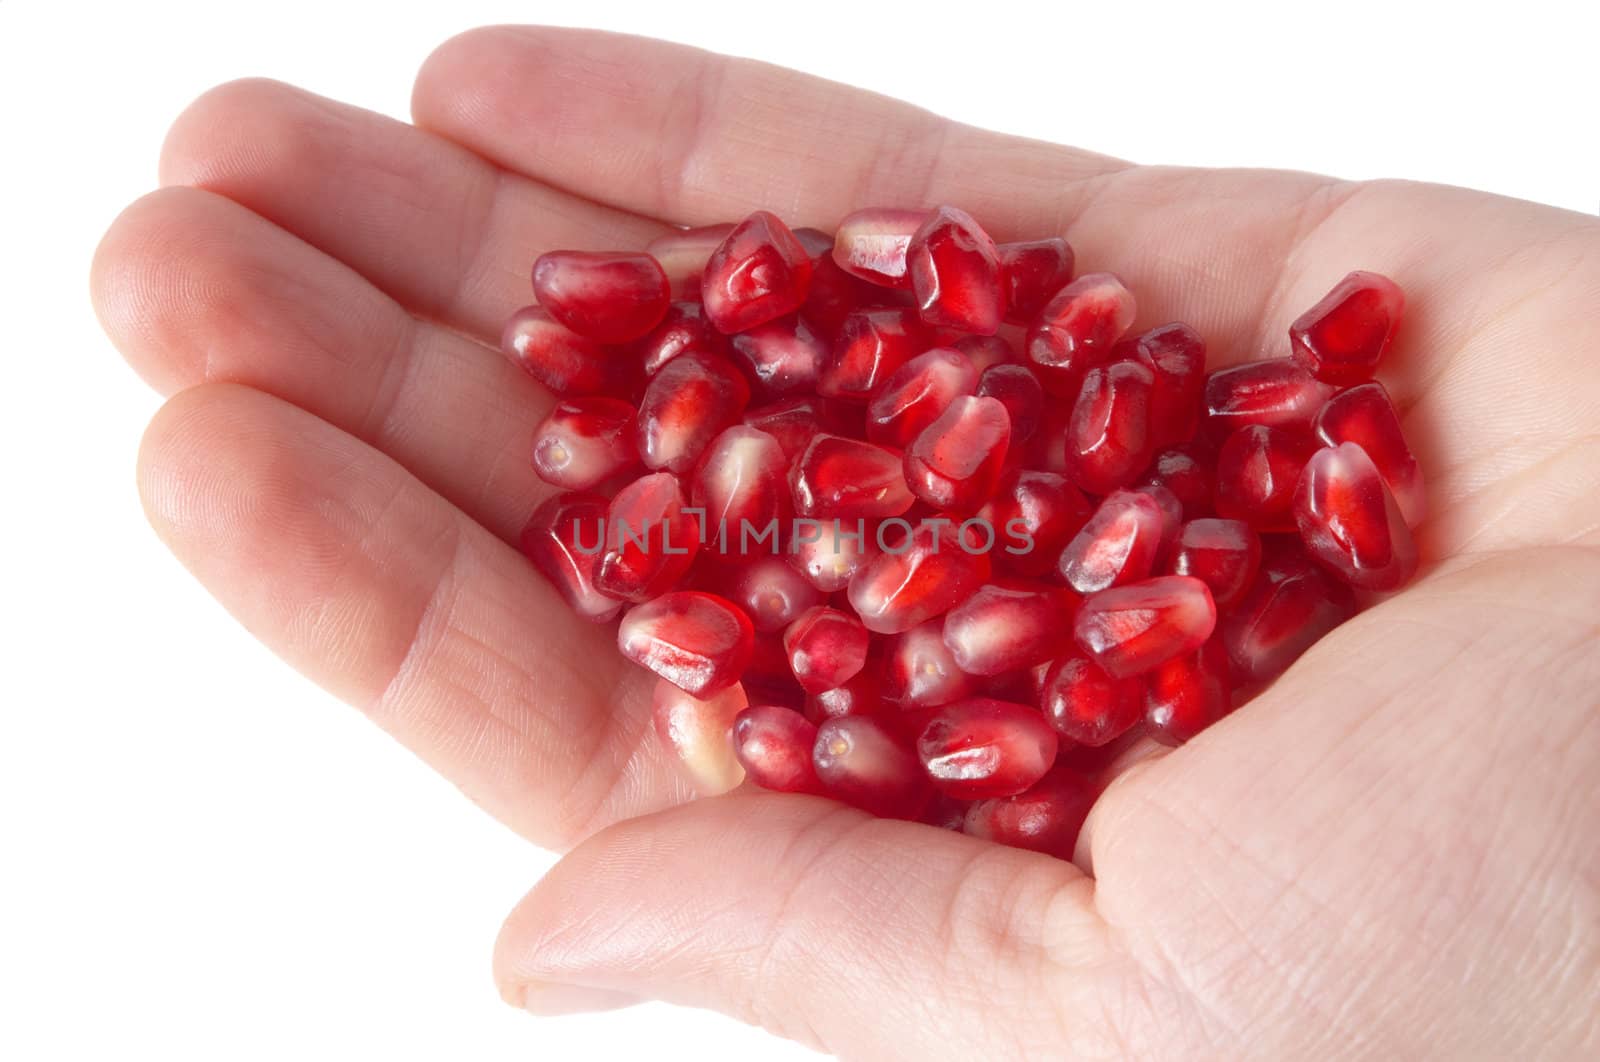 pomegranate seeds on human palm by starush